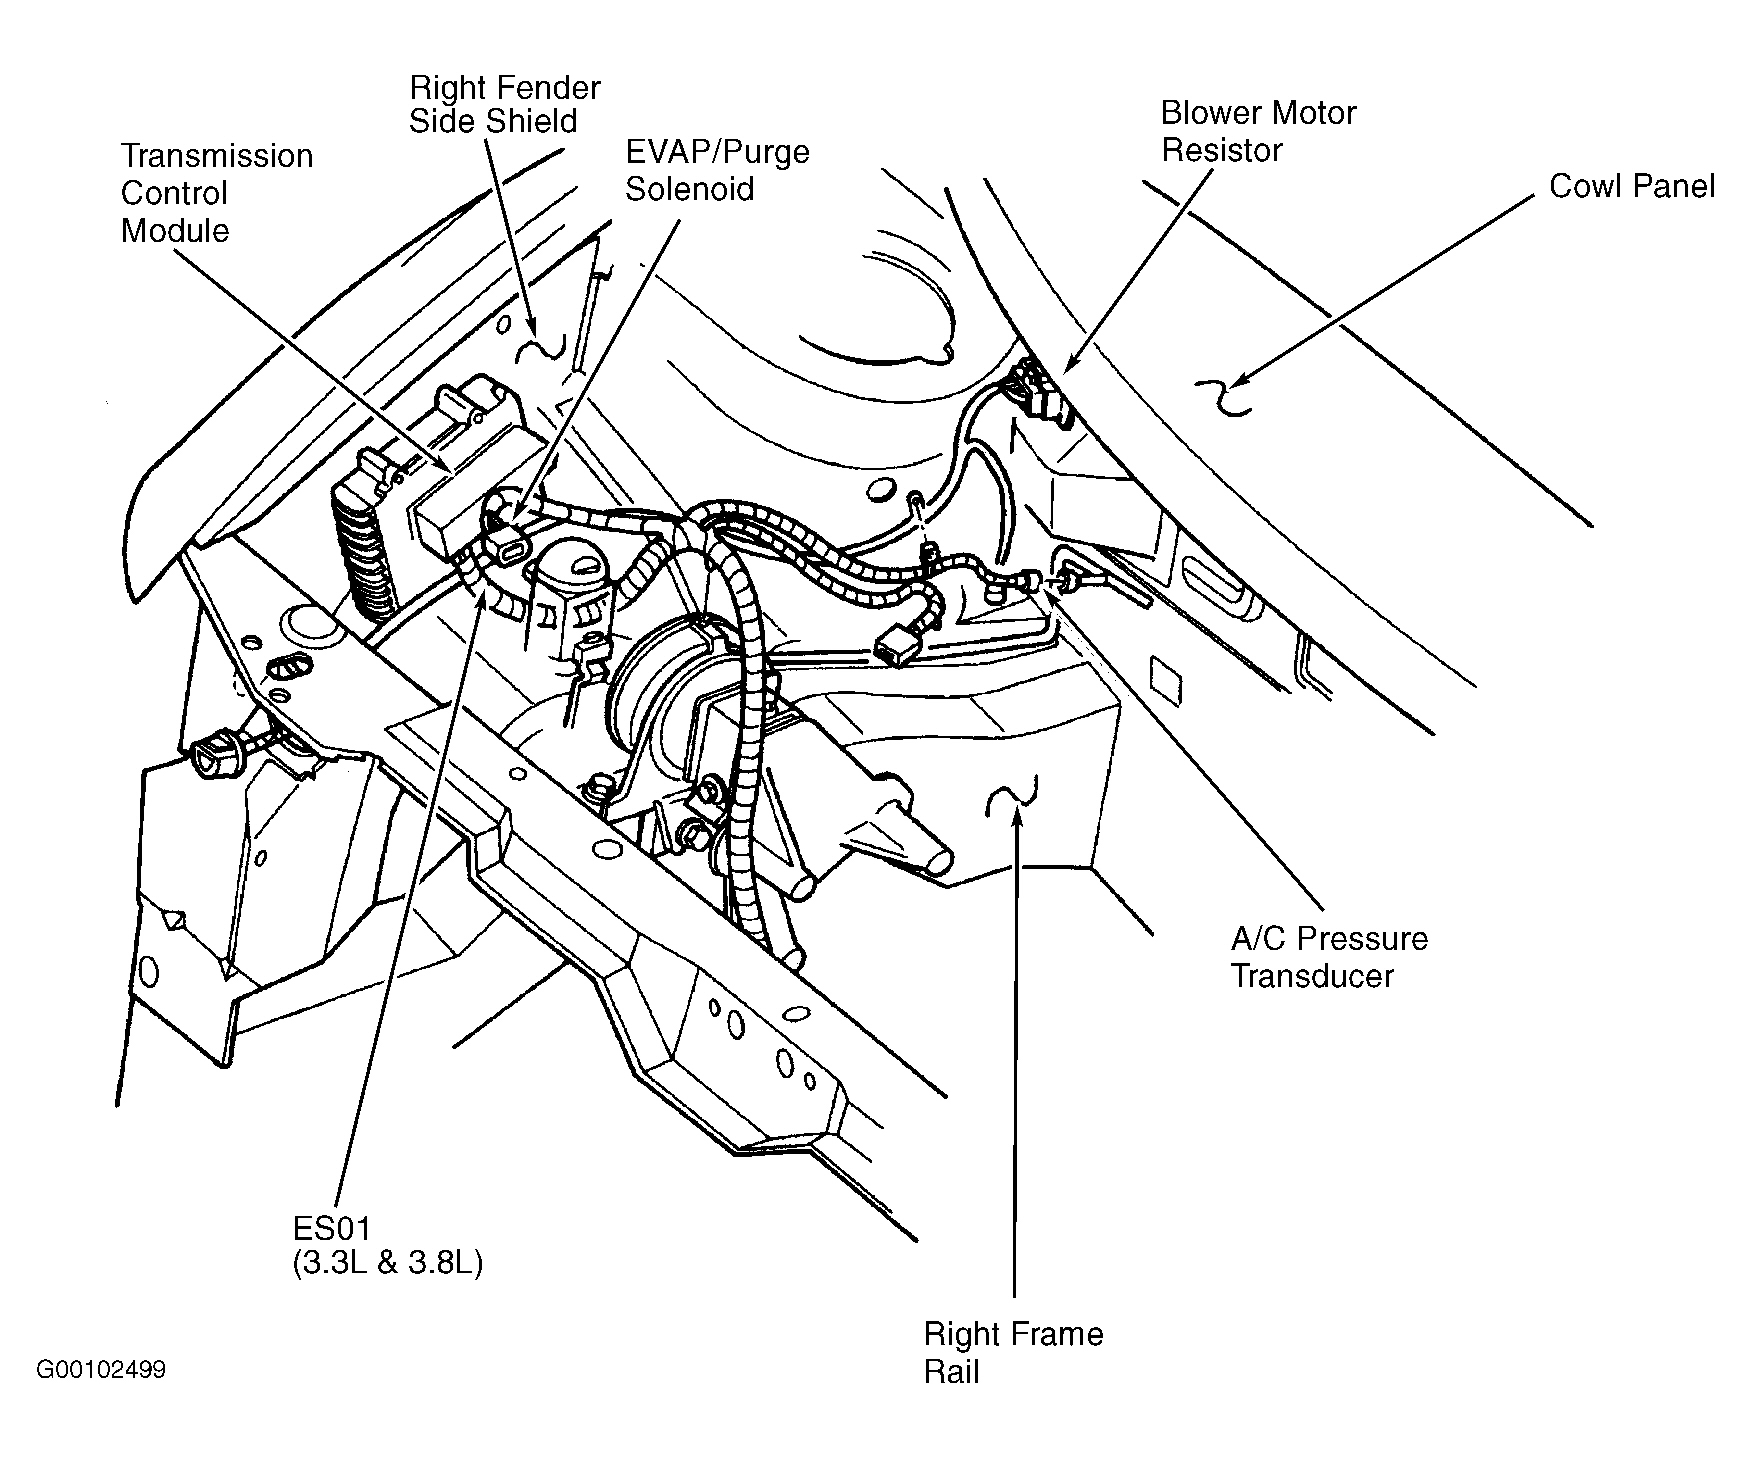 Dodge Grand Caravan ES 1996 - Component Locations -  Right Side Of Engine Compartment